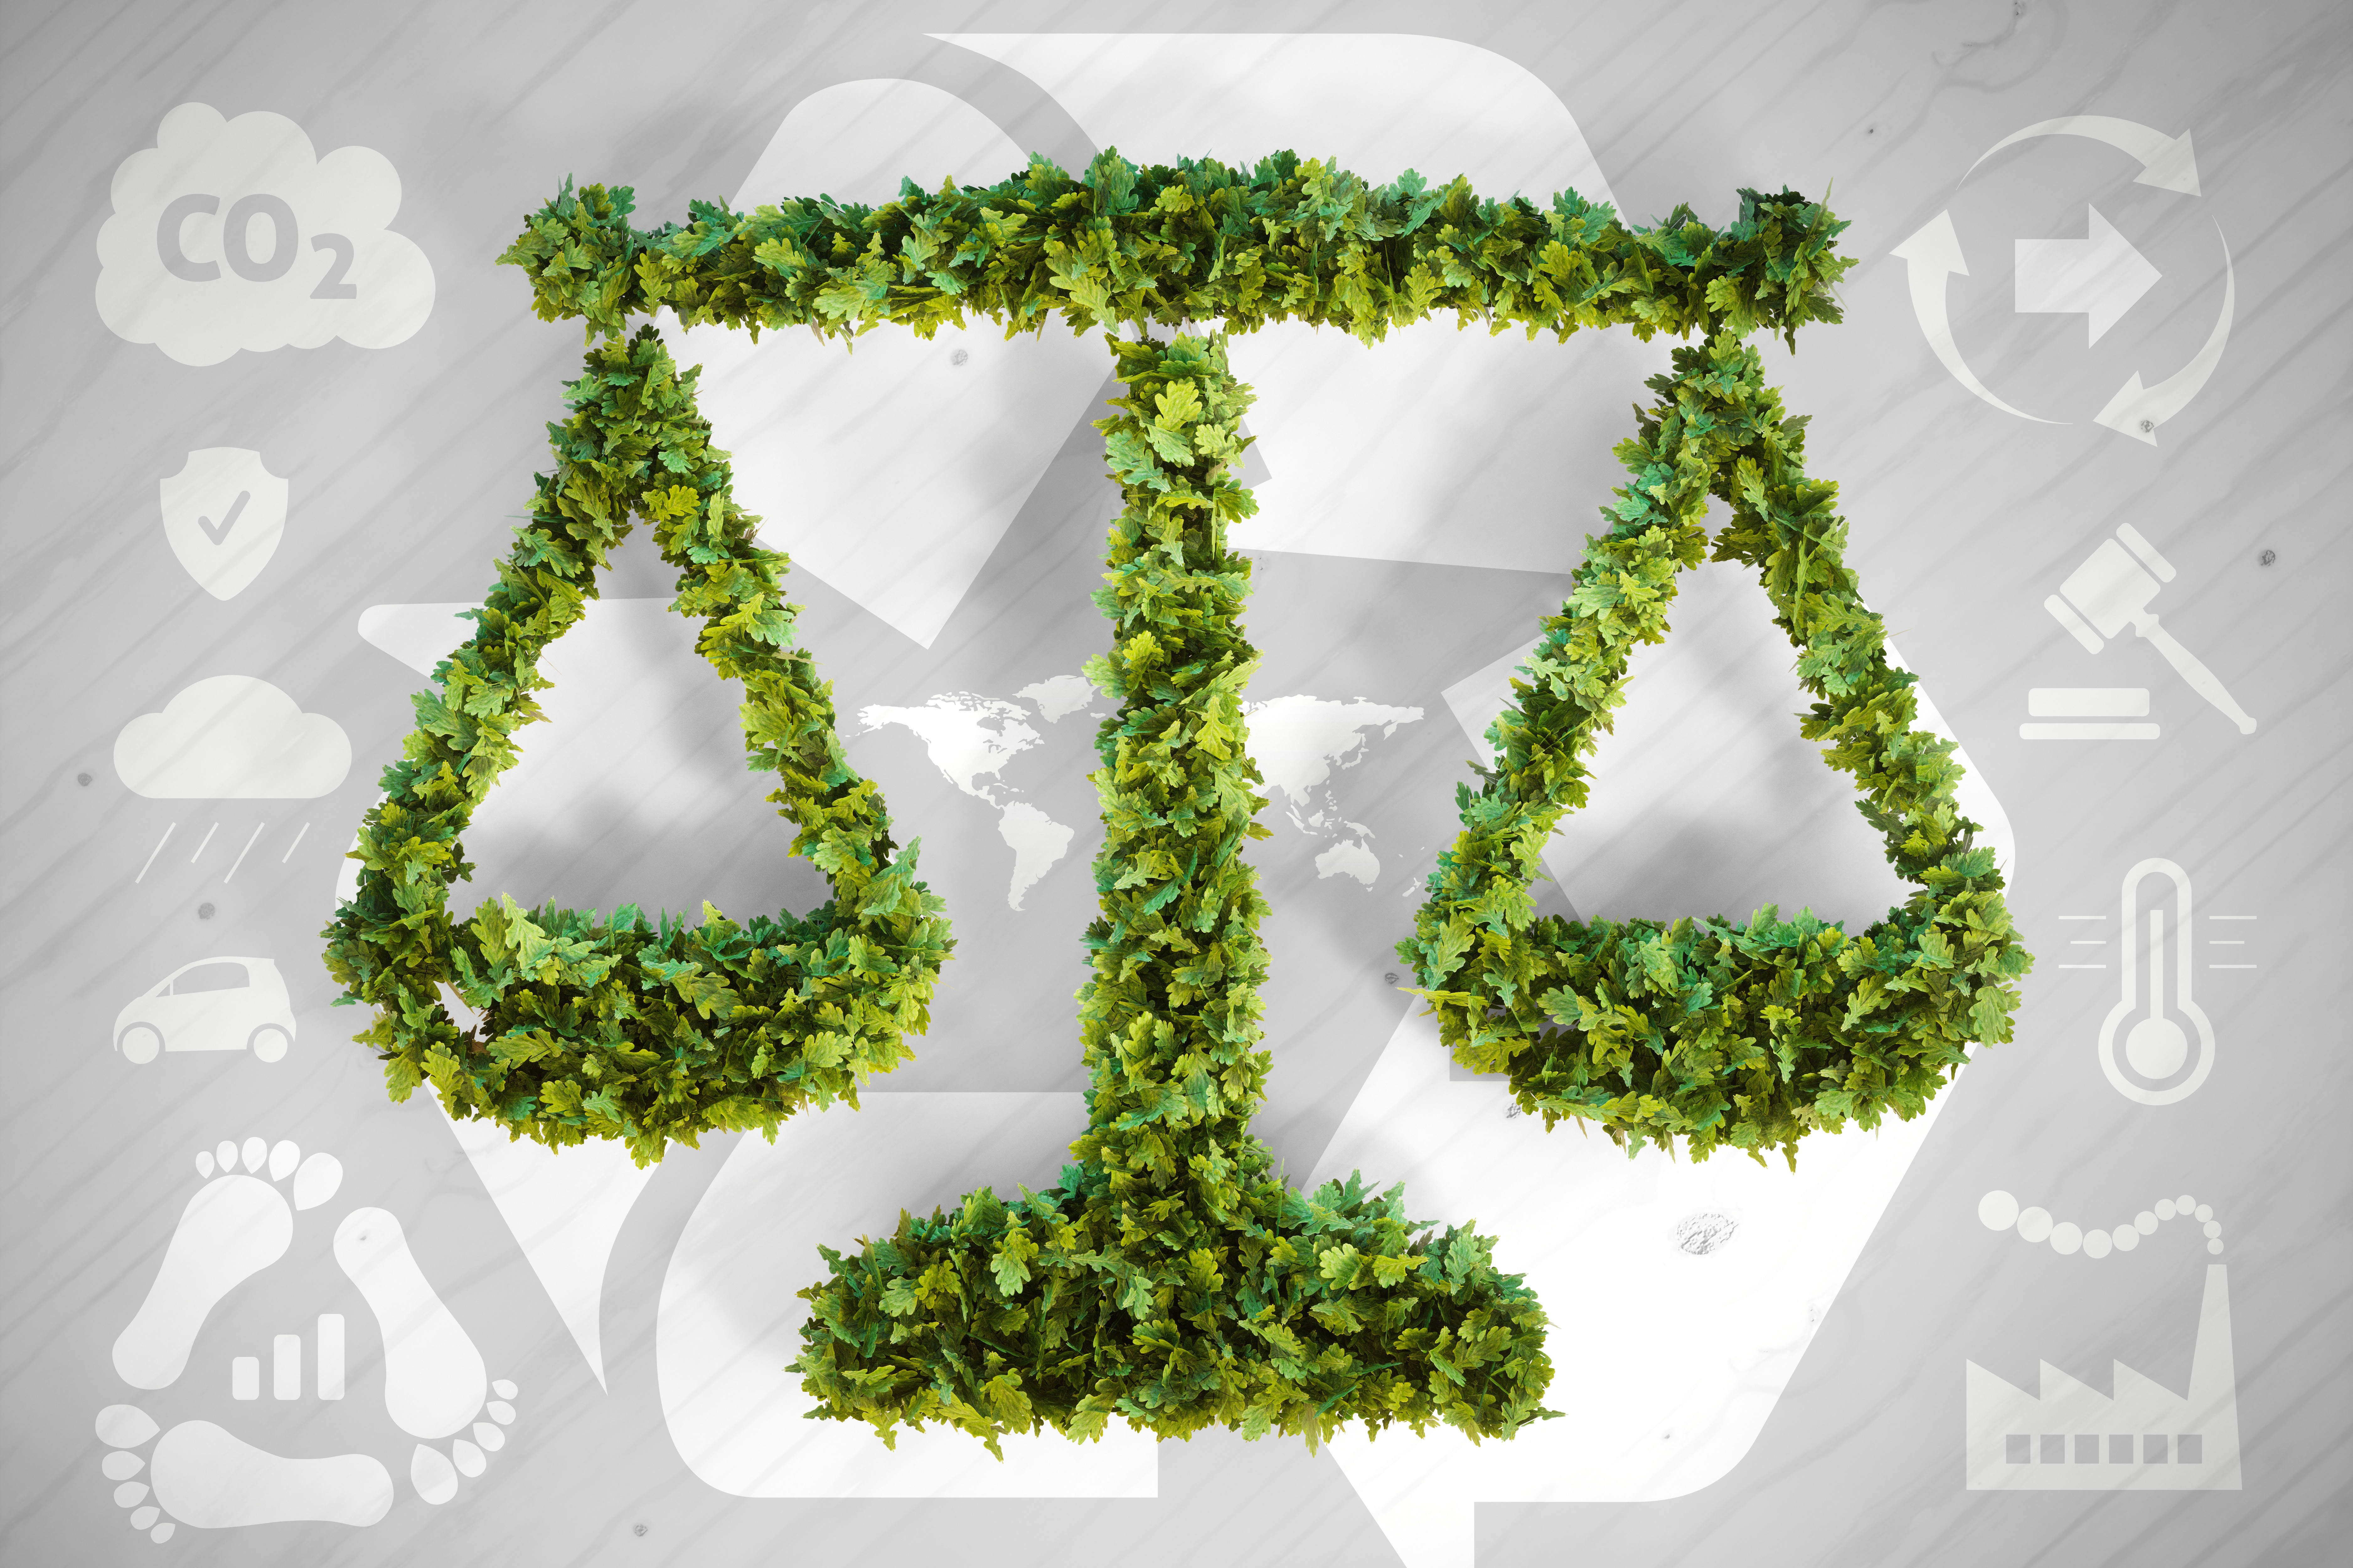 Illustration indicating balancing  scale of justice for the environment.